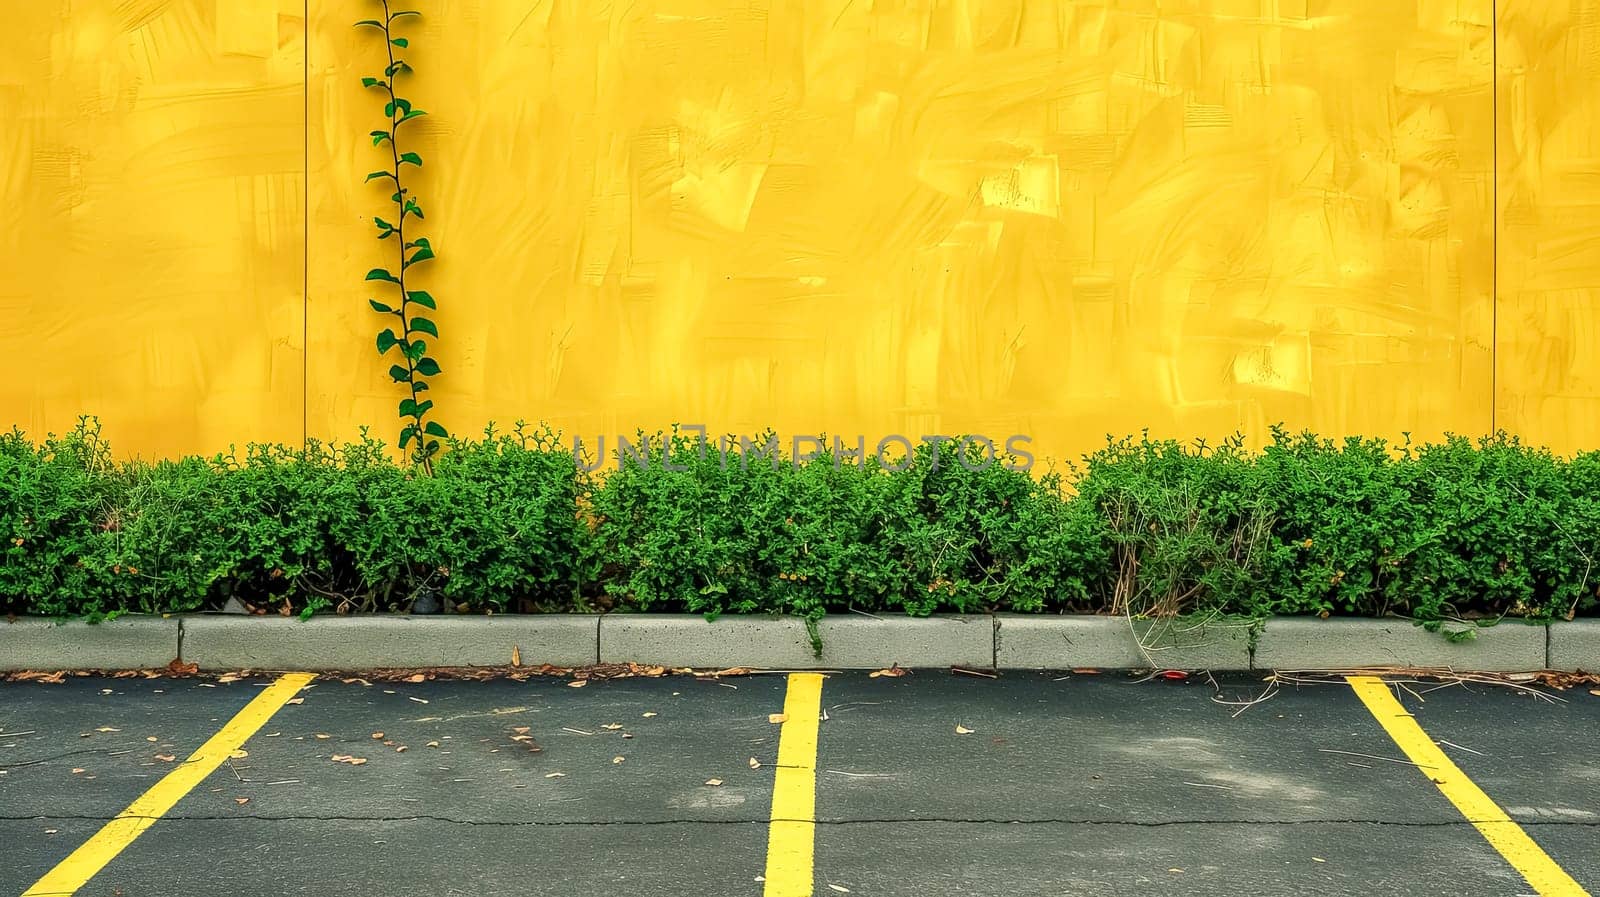 Green Vine on Yellow Wall with Parking Lot Lines by Edophoto